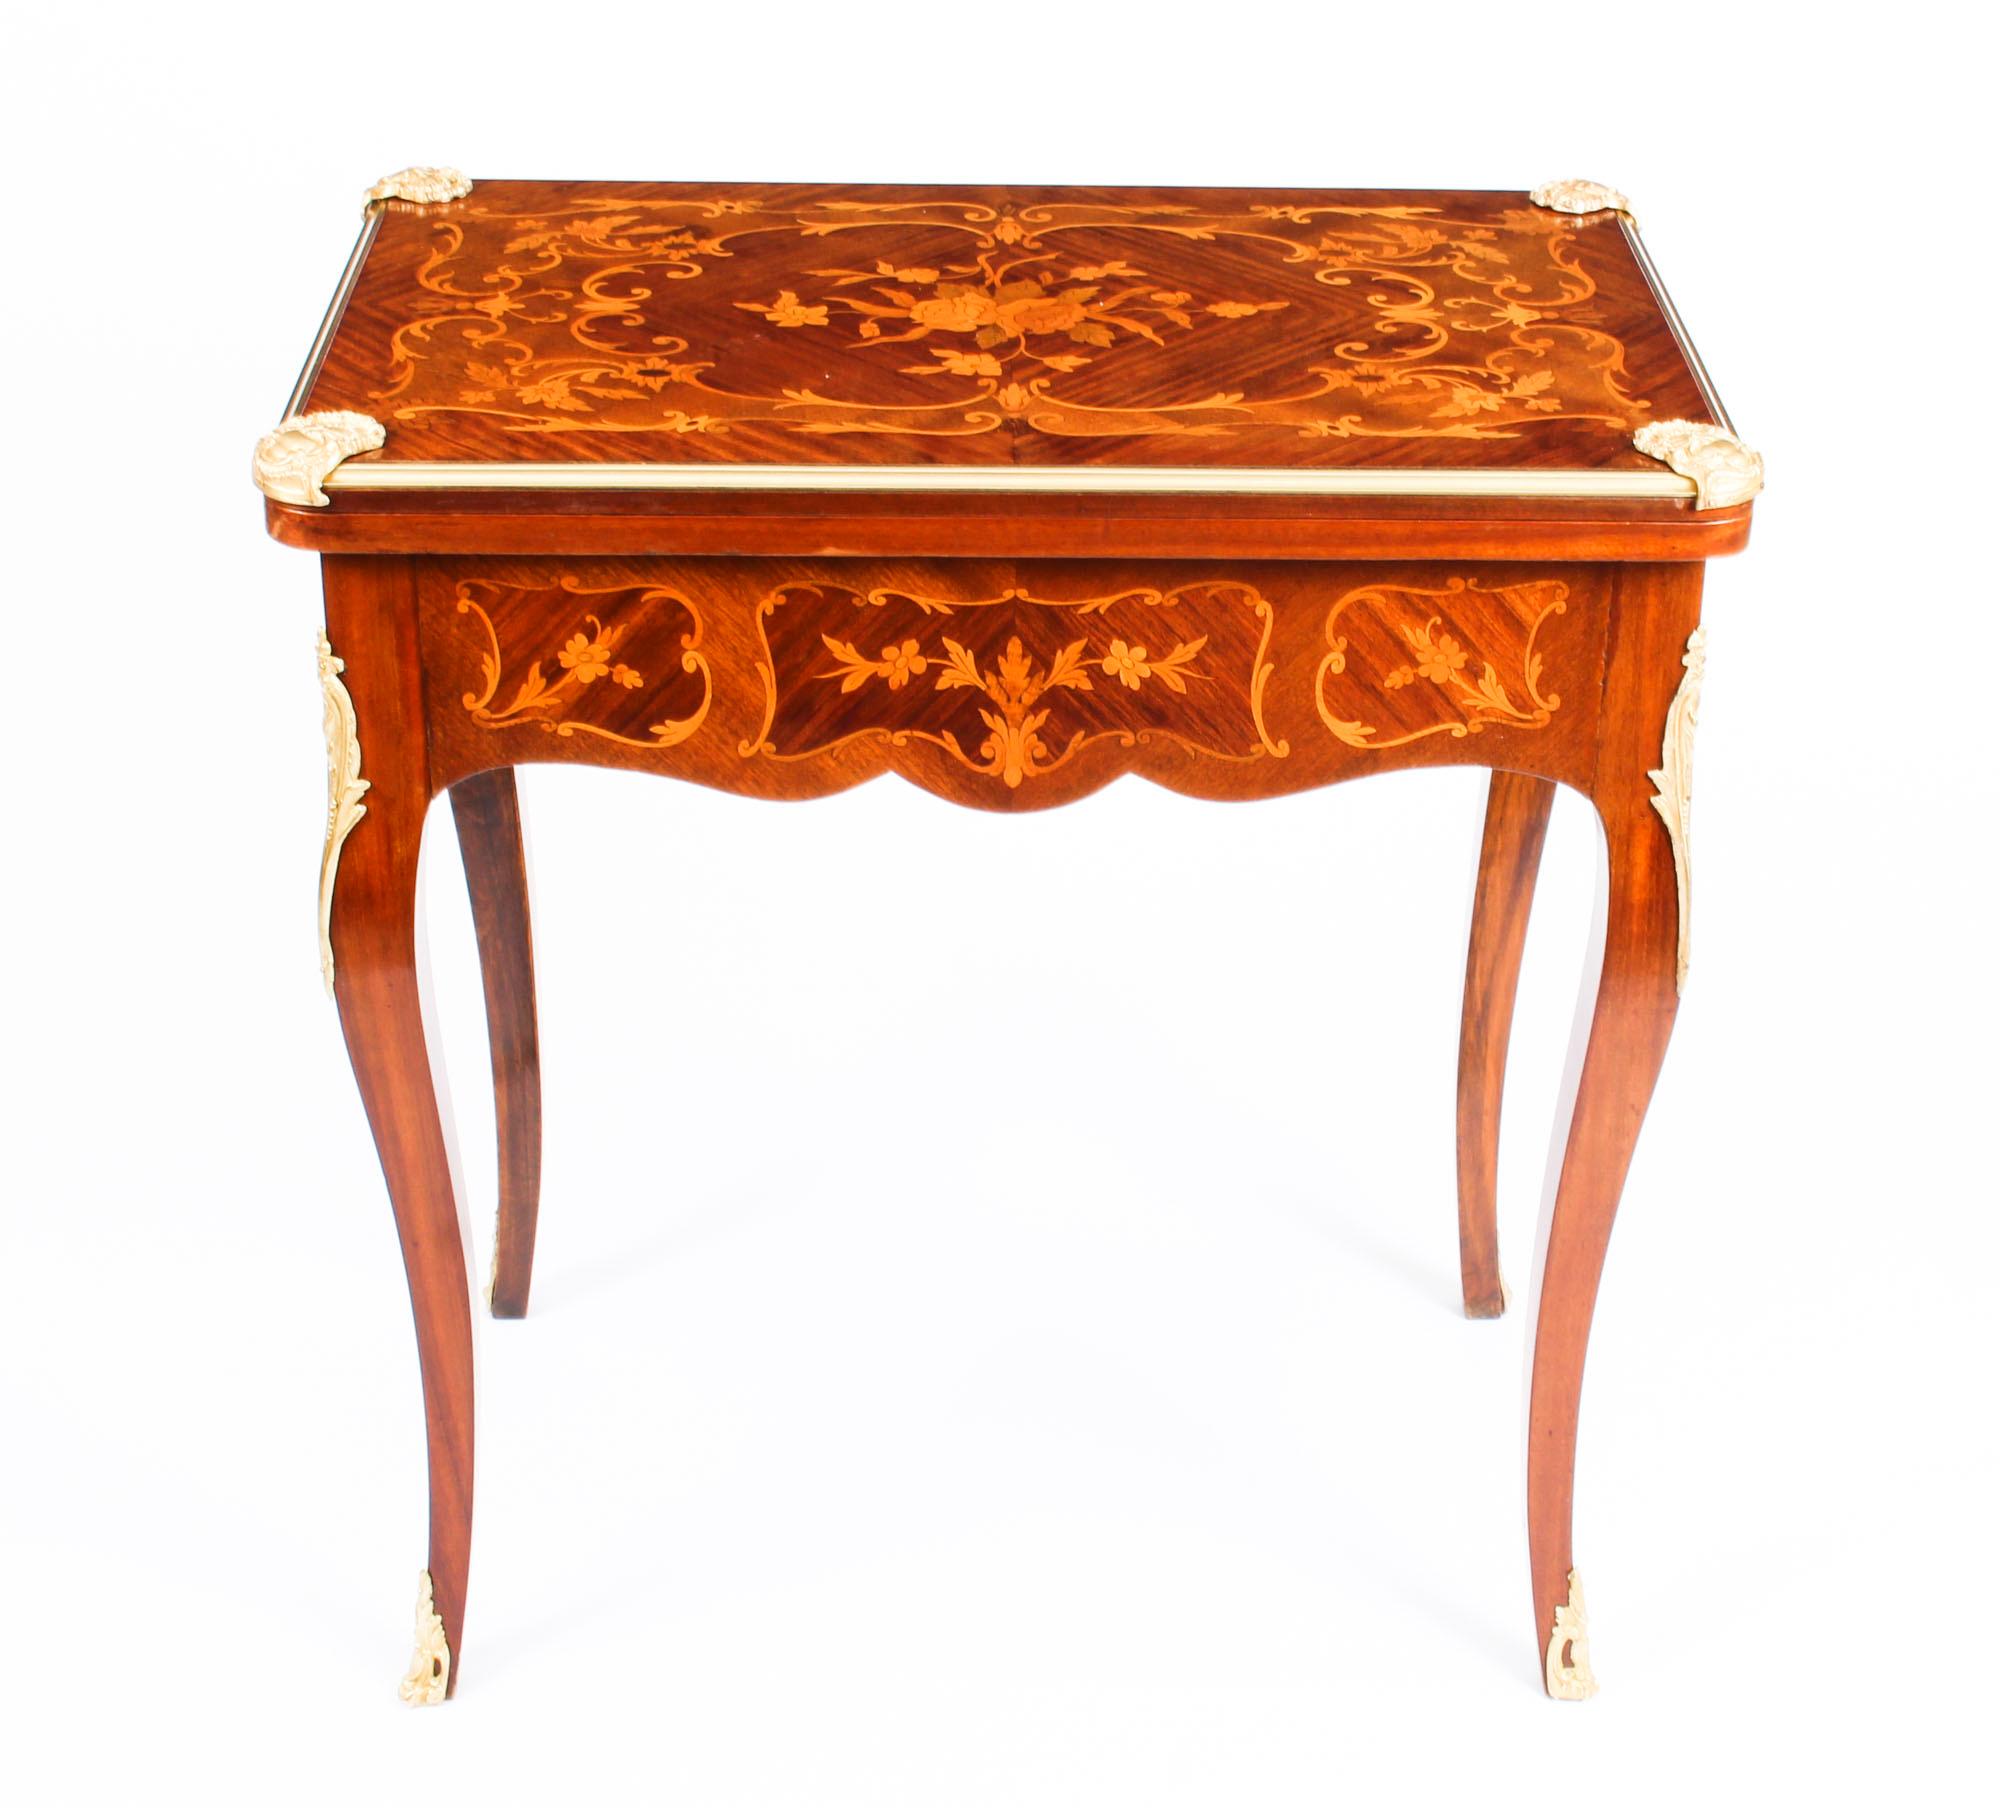 This is a superb antique French Louis XV Revival ormolu-mounted mahogany and marquetry rounded rectangular marquetry card table, circa 1880 in date.

This splendid card table features a folding top which features exquisite floral and foliate